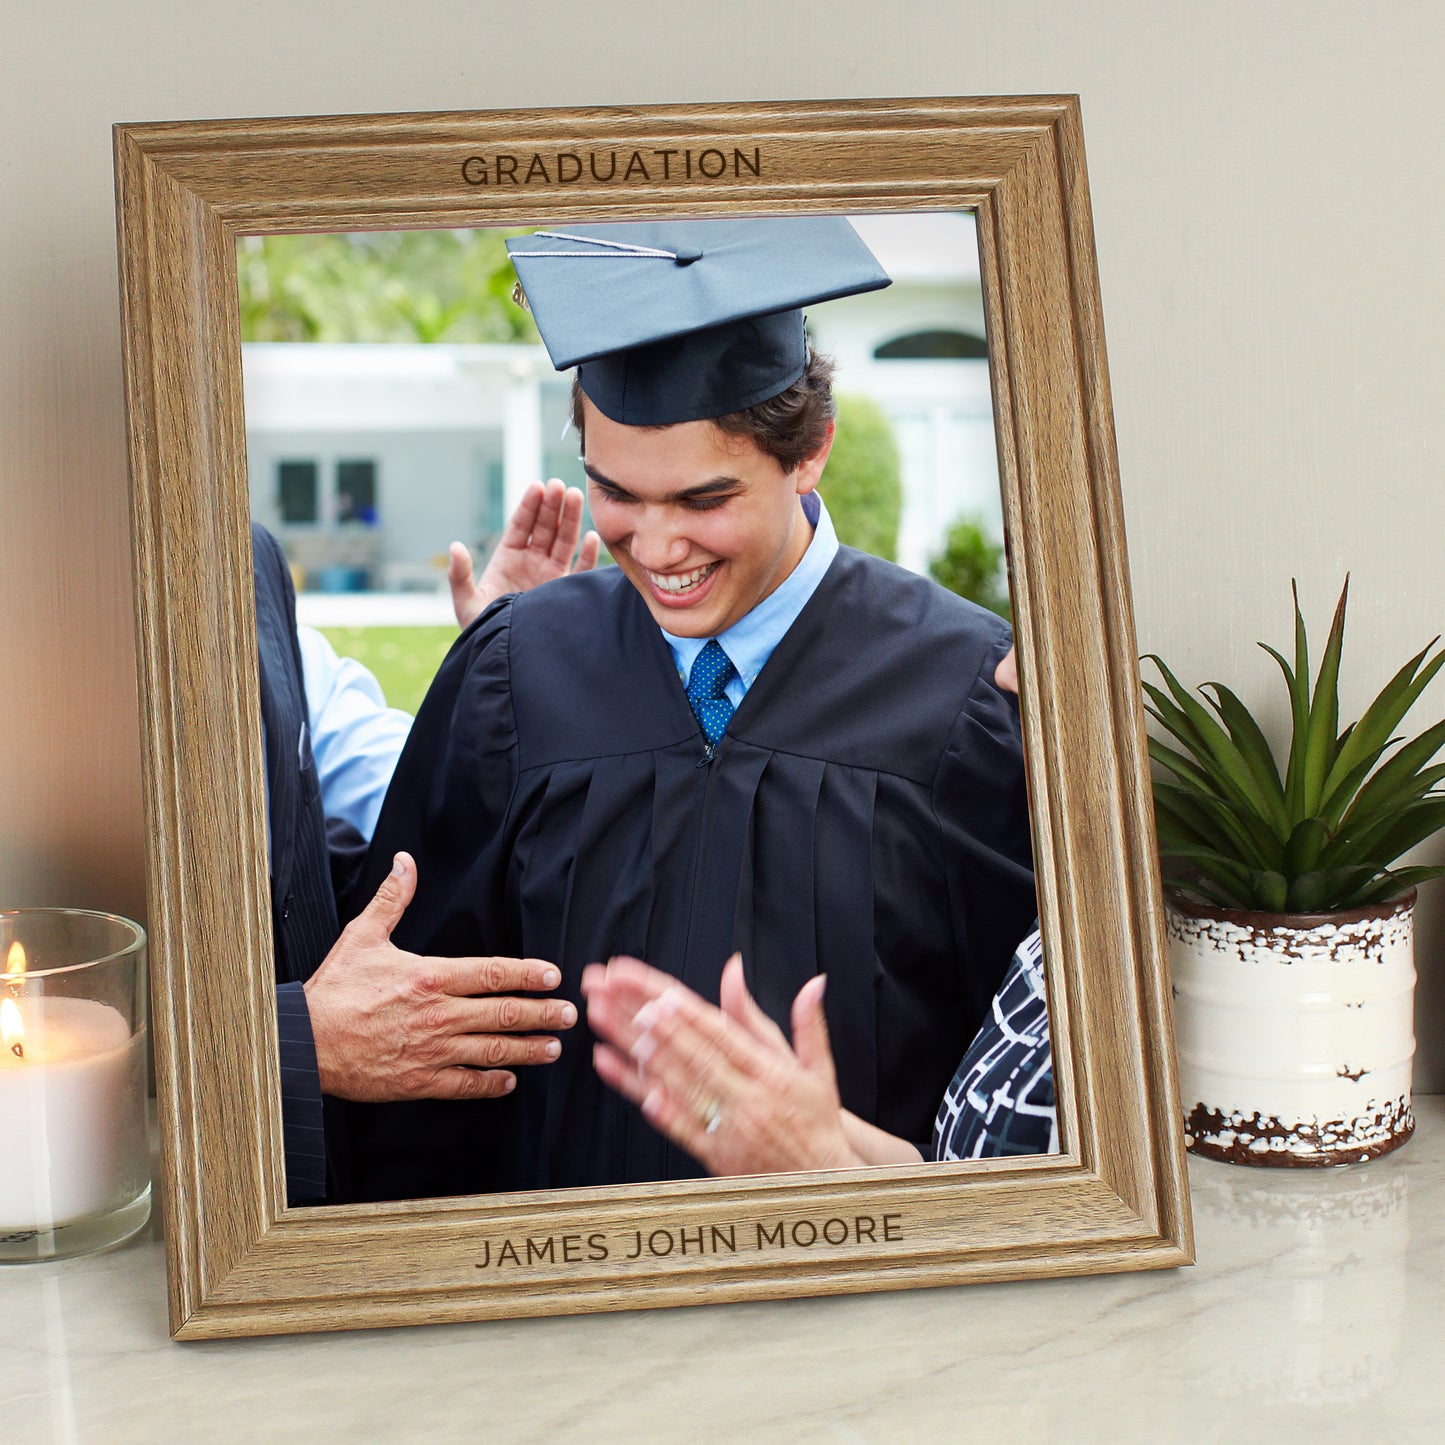 Personalised Any Message 8x10 Wooden Photo Frame